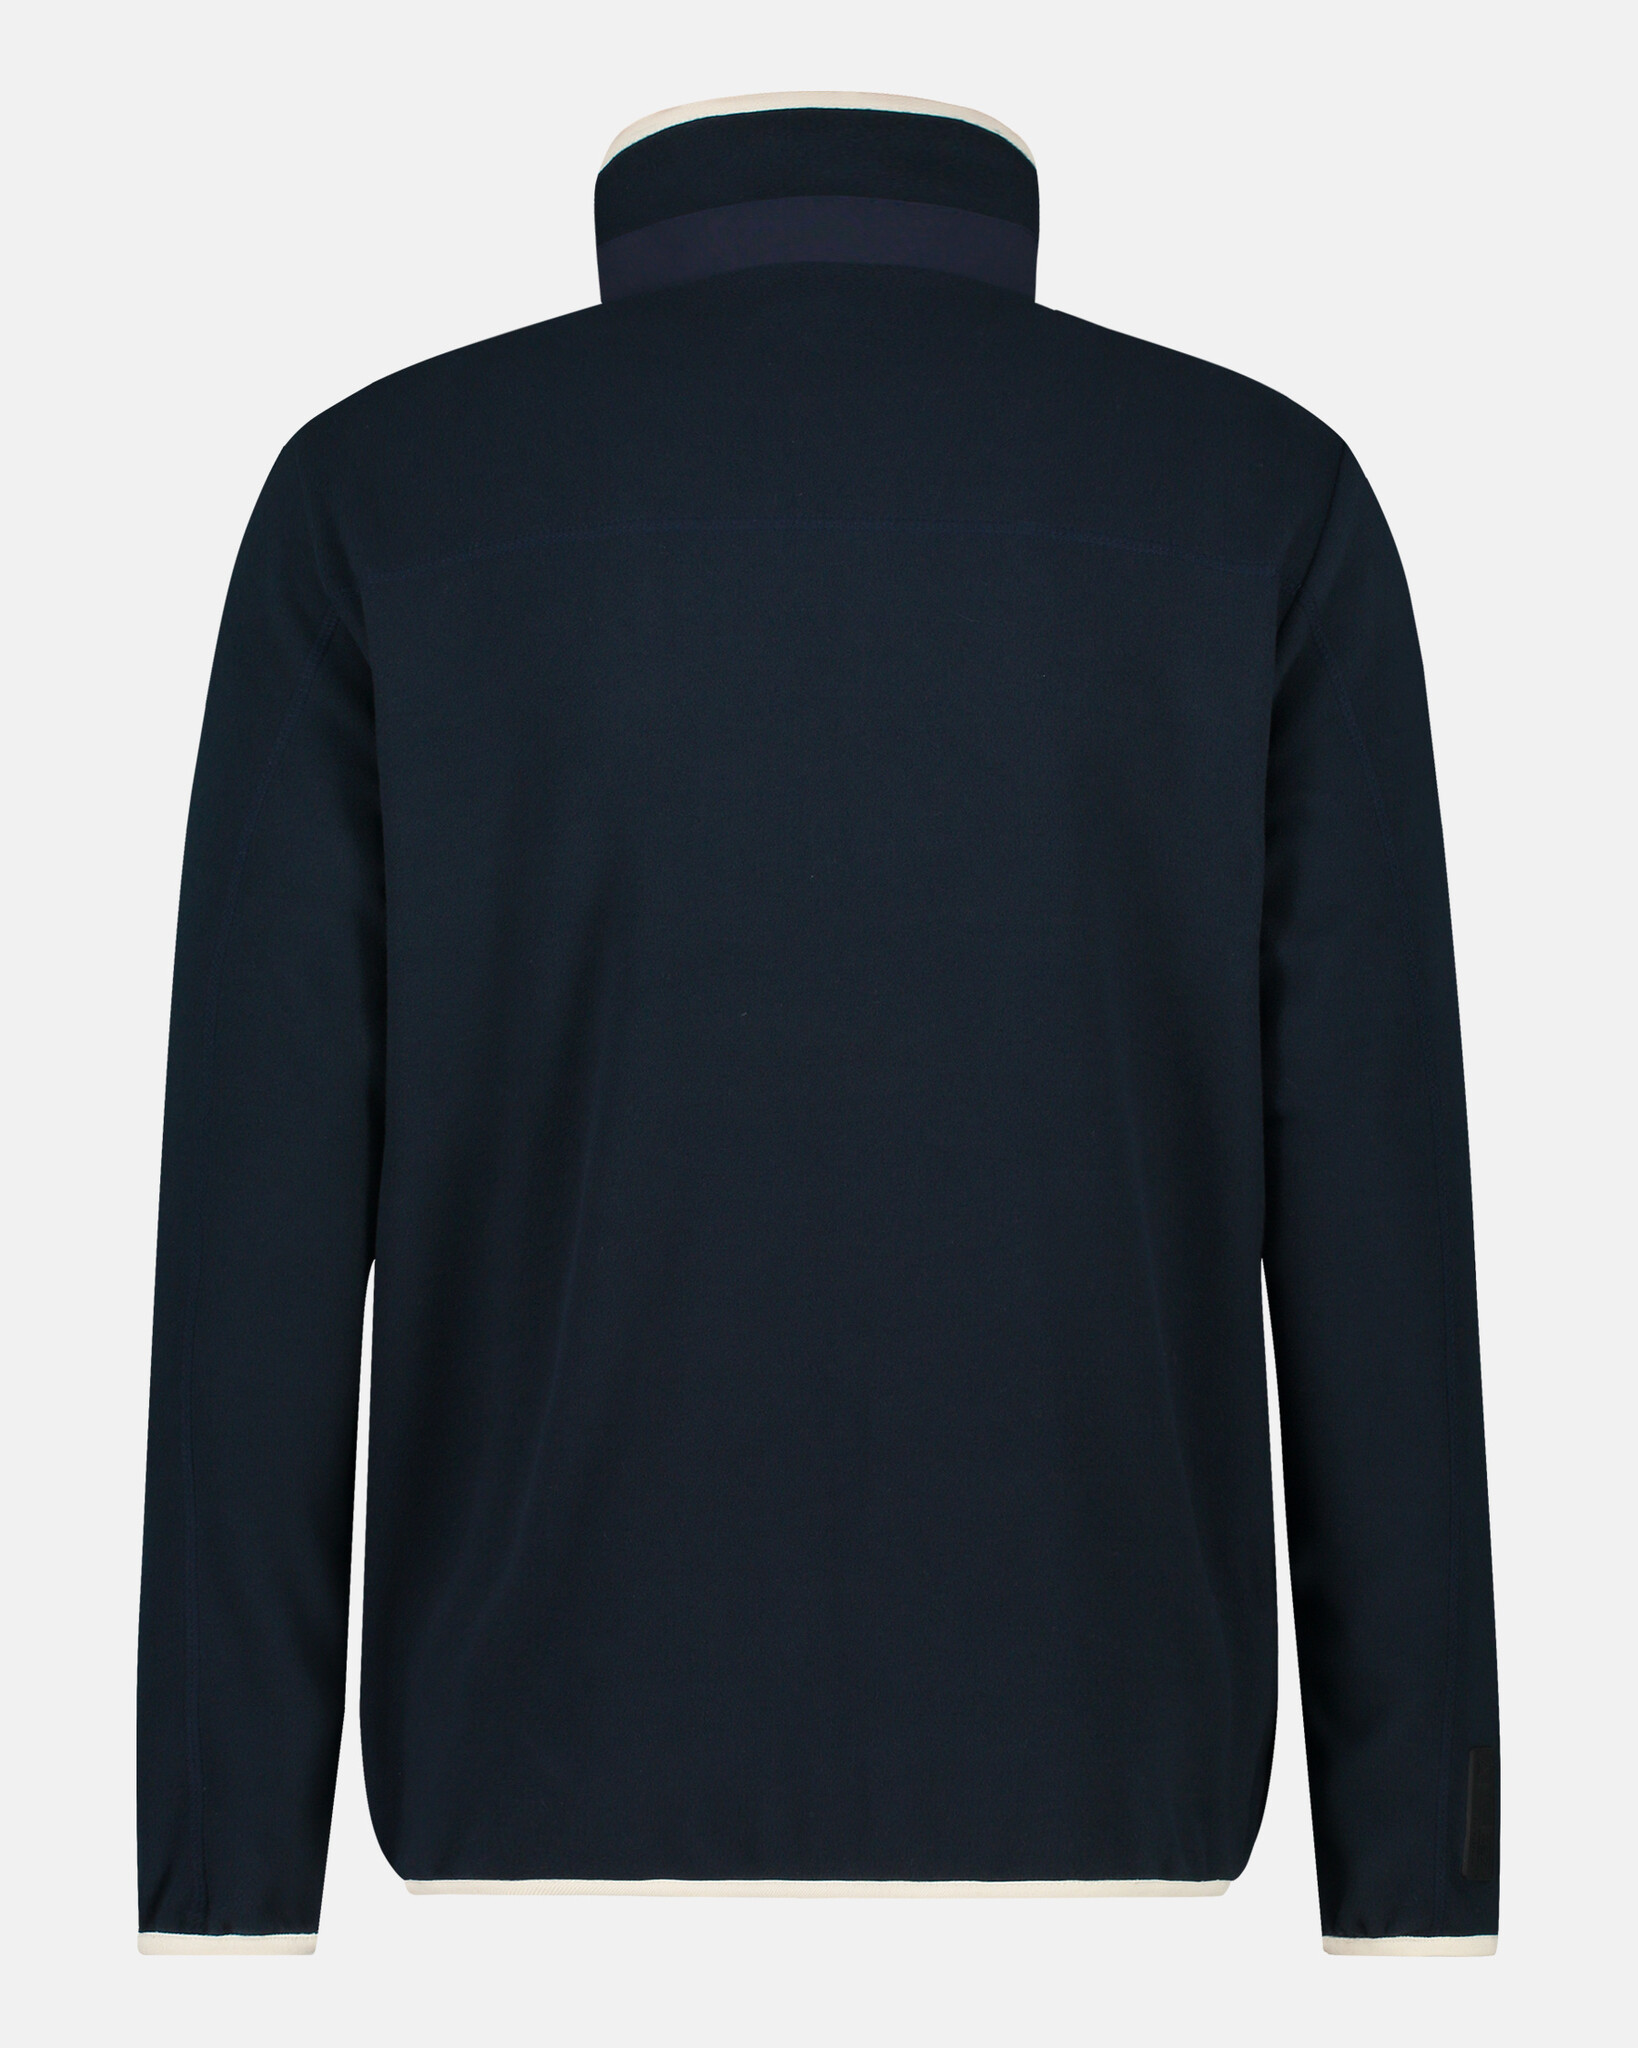 Fleece jacket with padded and lined front panel made from 100% recycled polyester